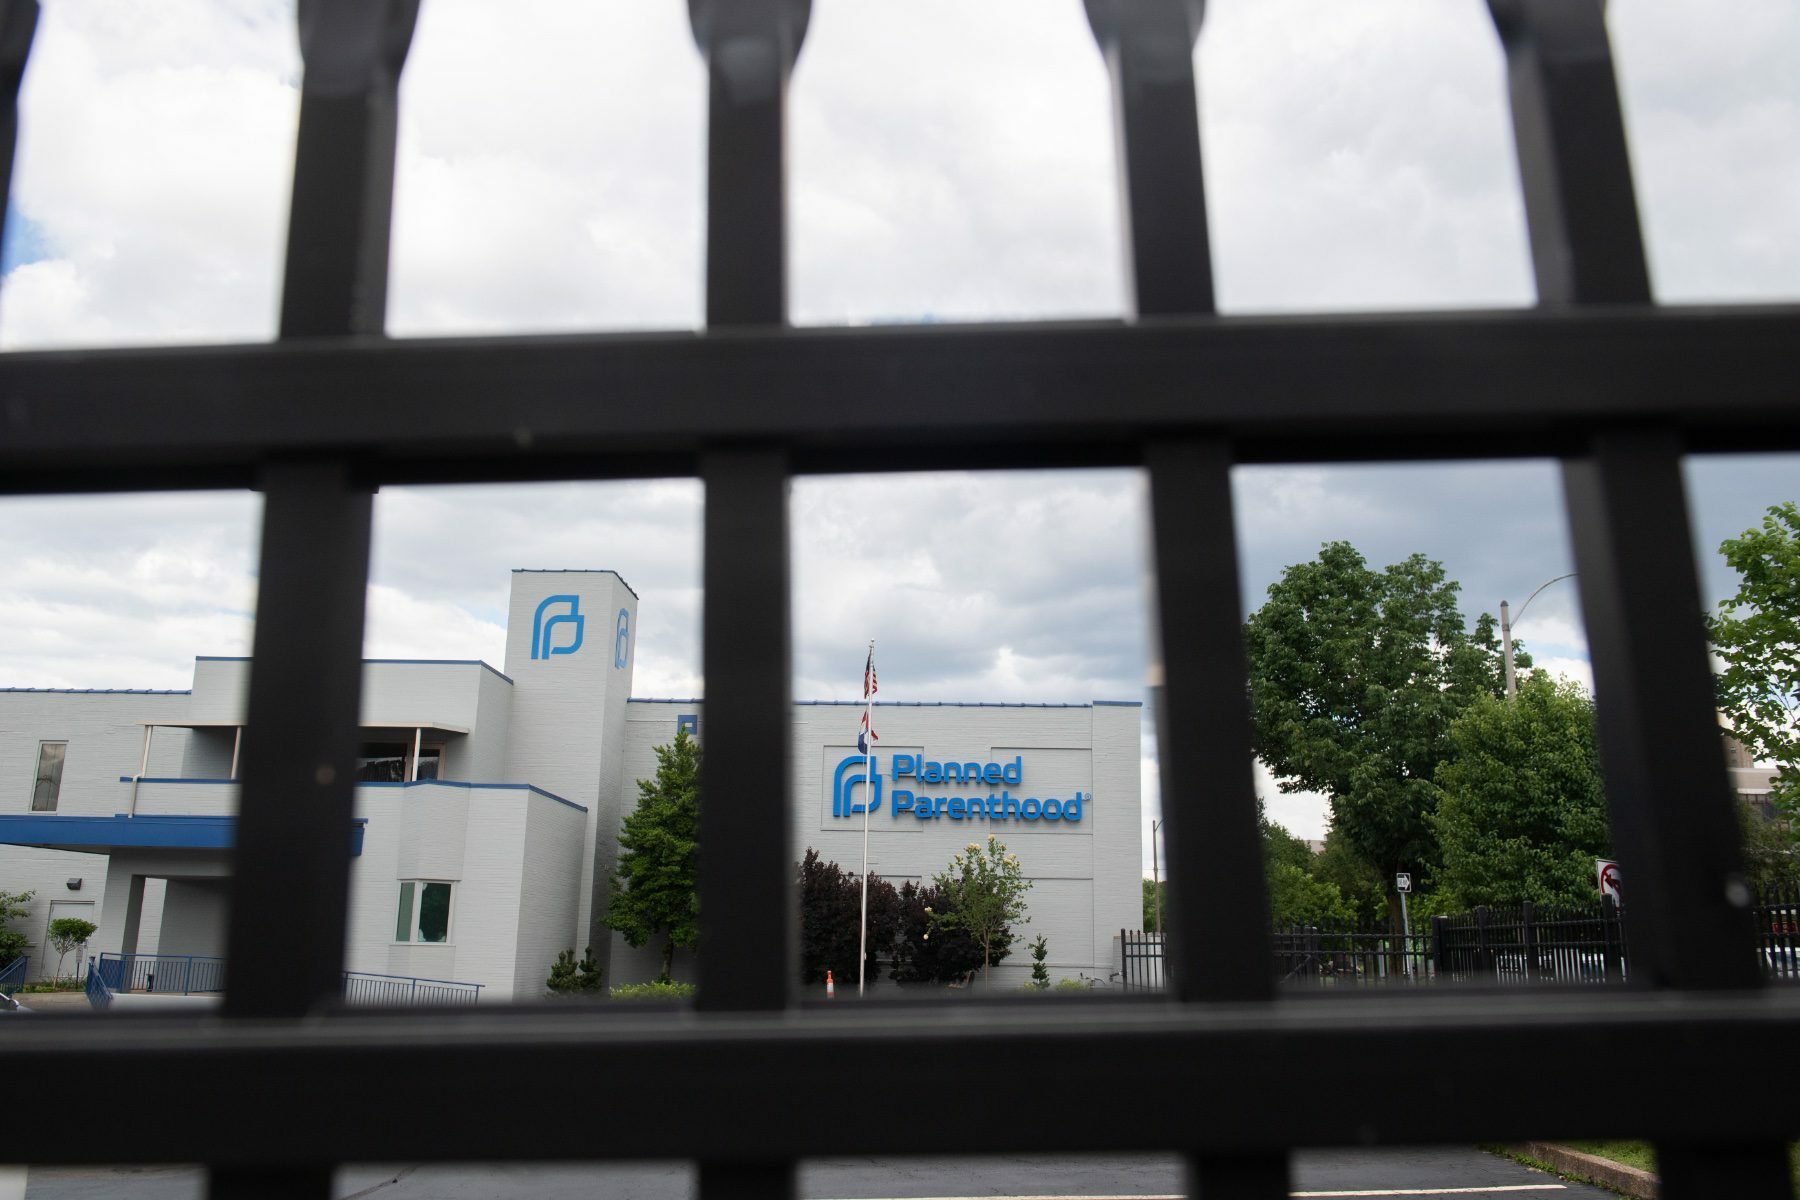 A fence in the foreground with a Planned Parenthood building in the background.